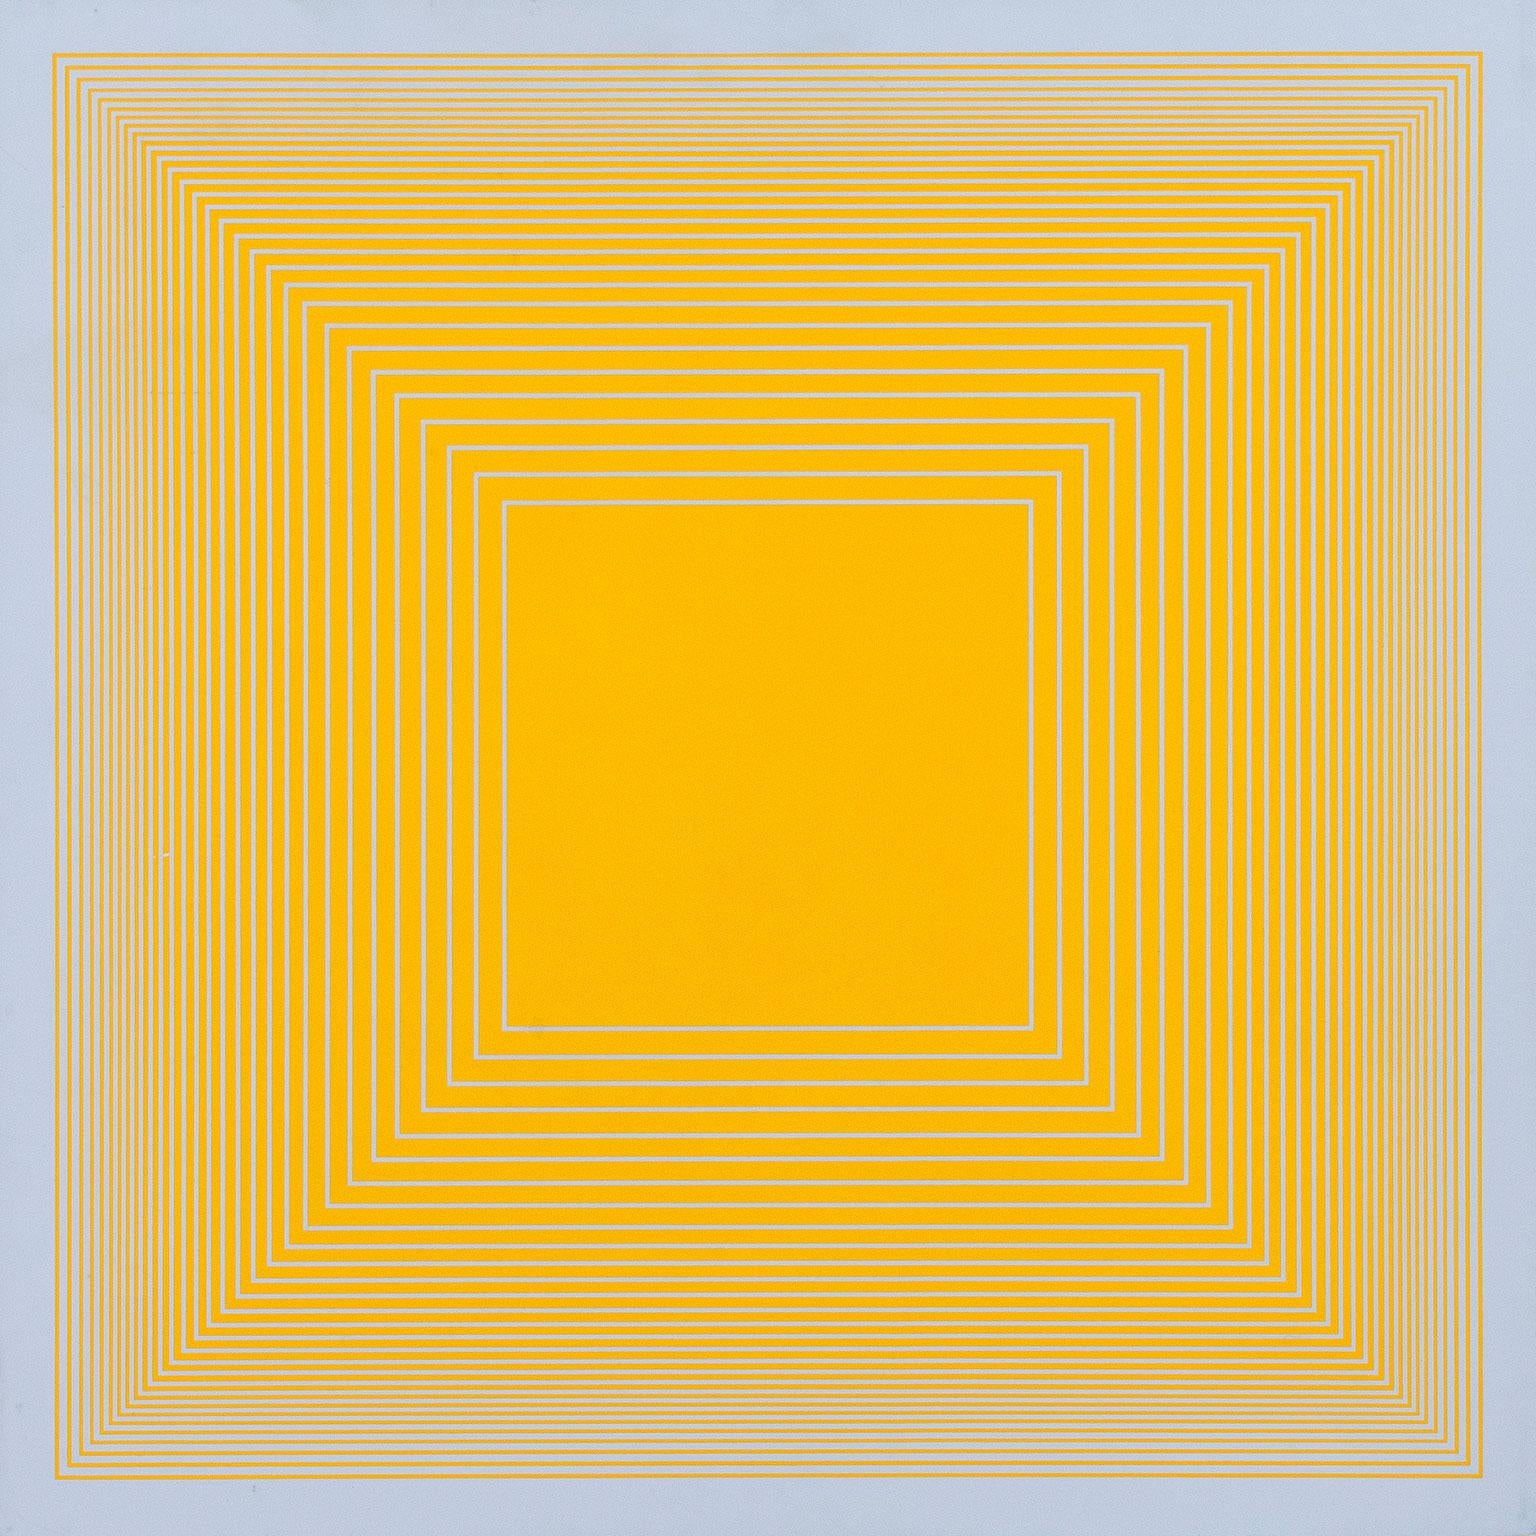 One of our favorite American artists, Richard Anuszkiewicz (b. 1930) is a major player in both Op Art and Hard-Edge Abstraction. His work is typically composed of neon candy colors in strict geometries. 

As the artist explained “I’m interested in